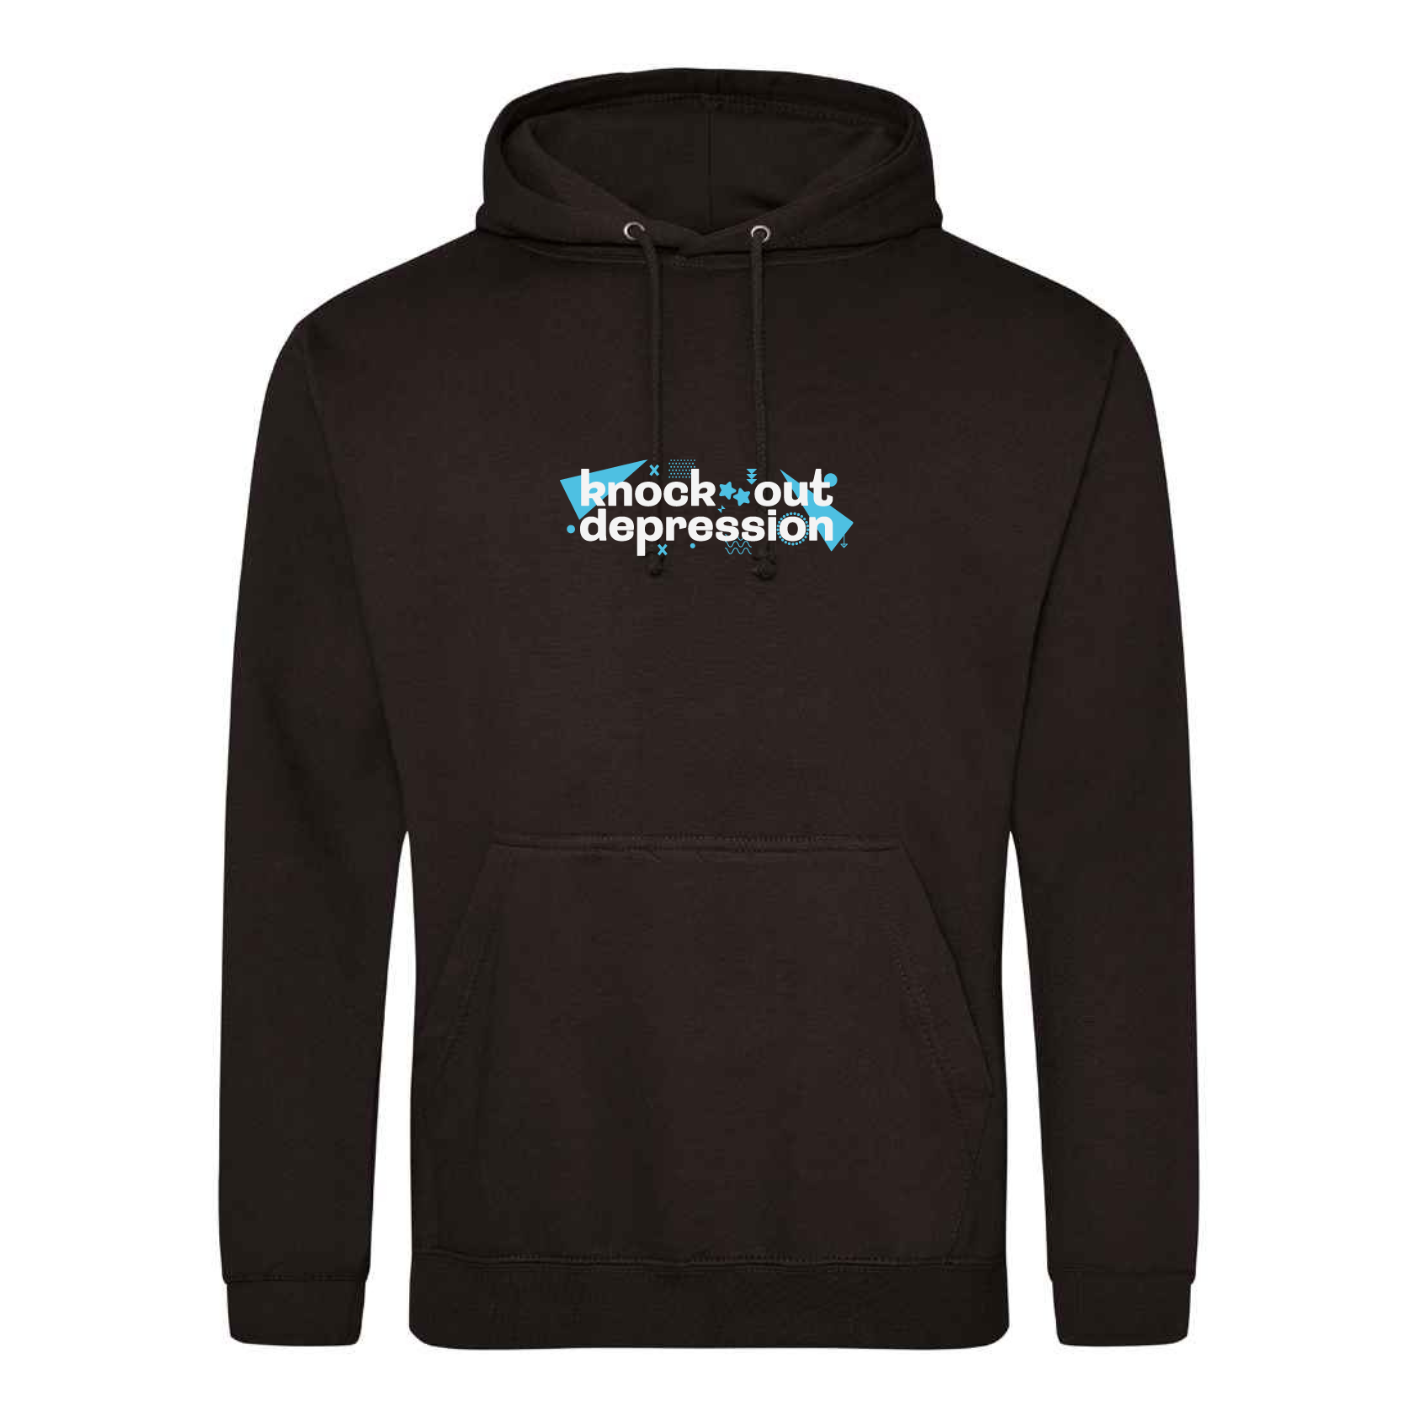 Knock Out depression hoodie in black